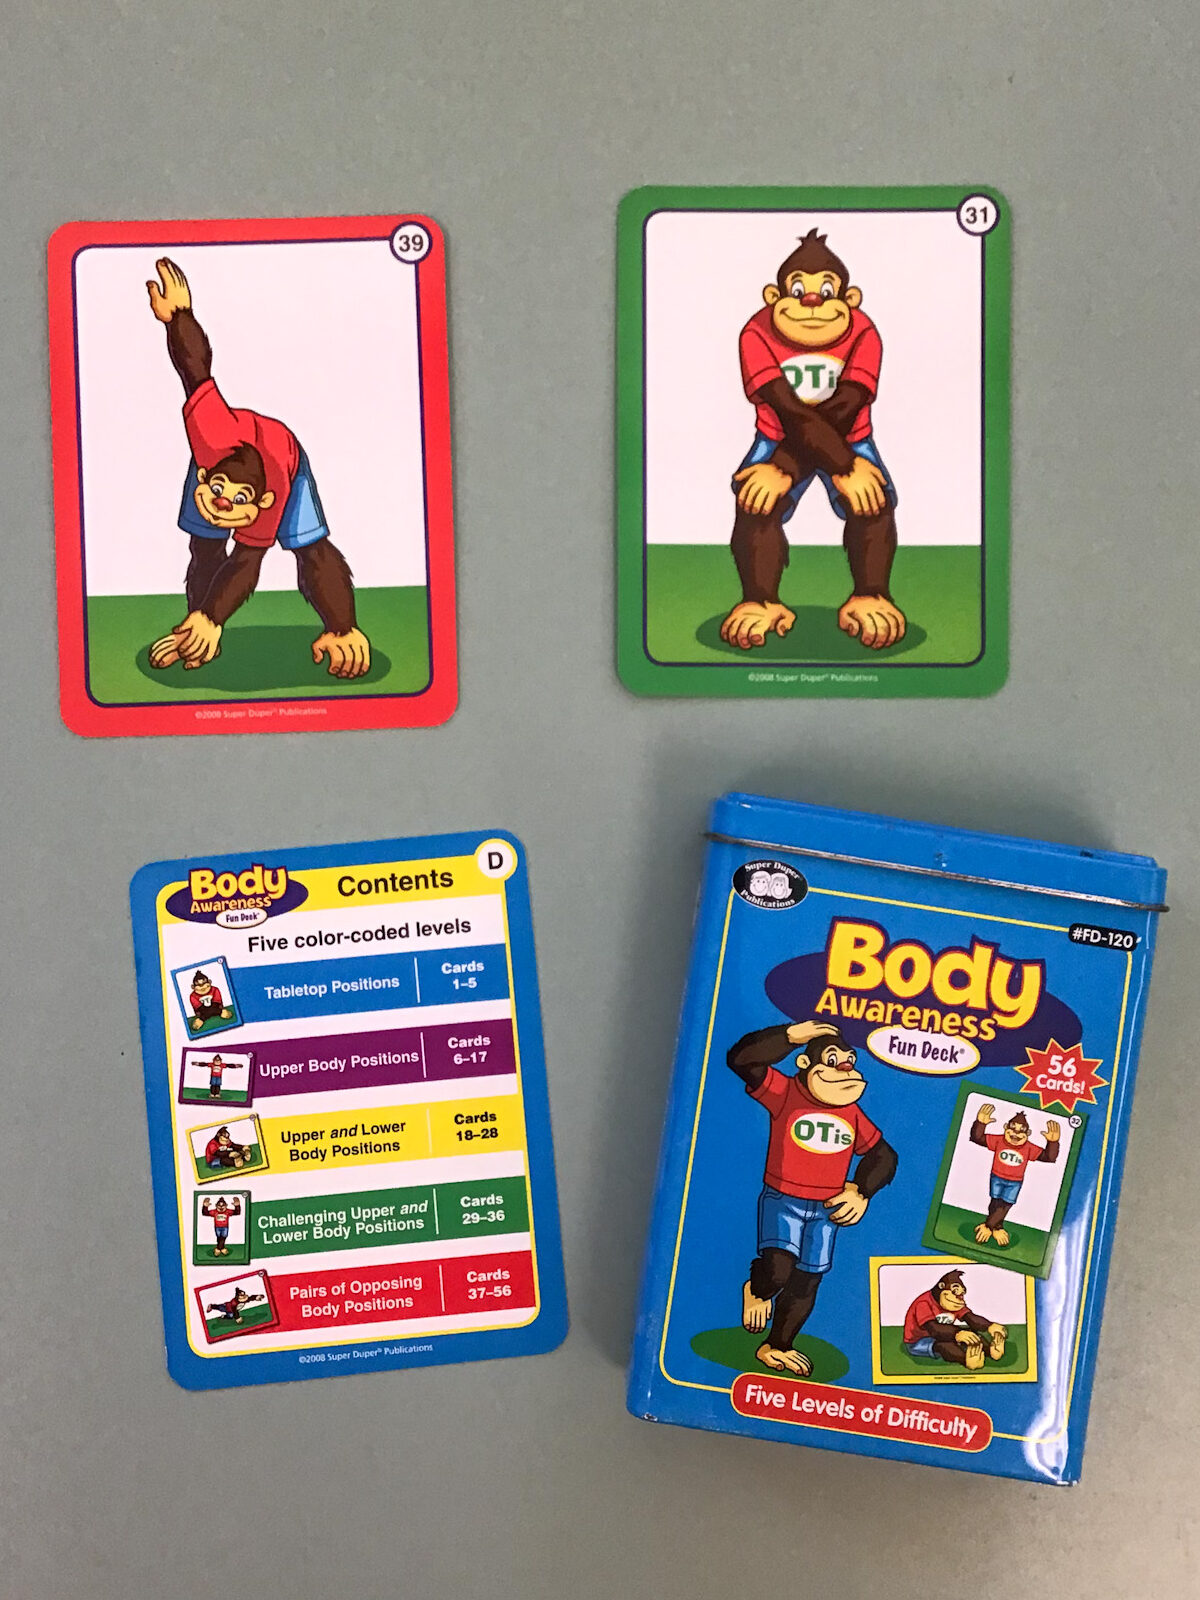 Yogorilla Body Awareness Fun Deck with contents card and two sample cards